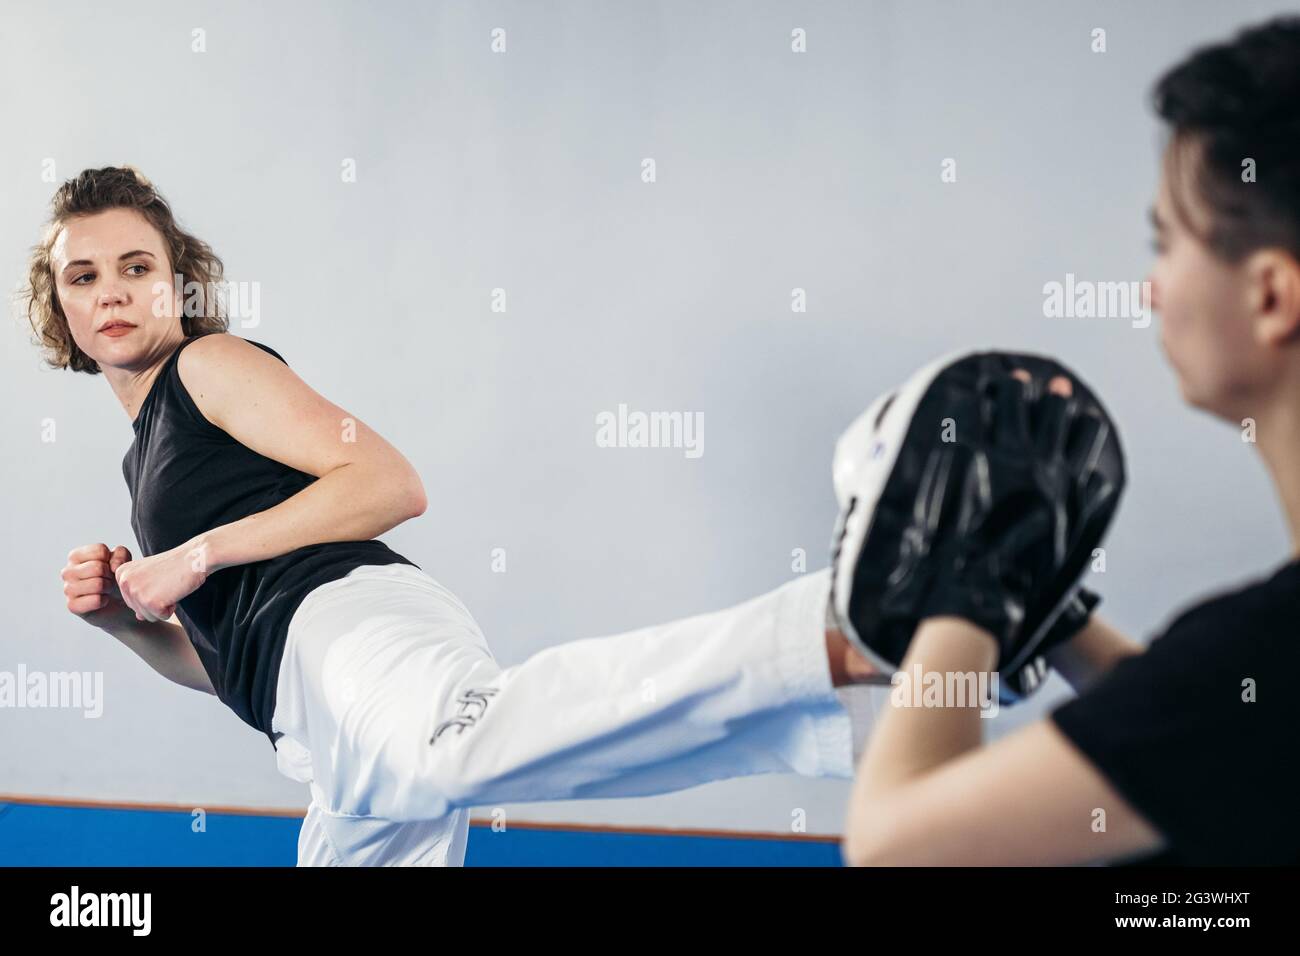 Close-up of barefoot woman leg practicing kicking with taekwondo coach who holds boxing paw. Concentrated active female kicking Stock Photo